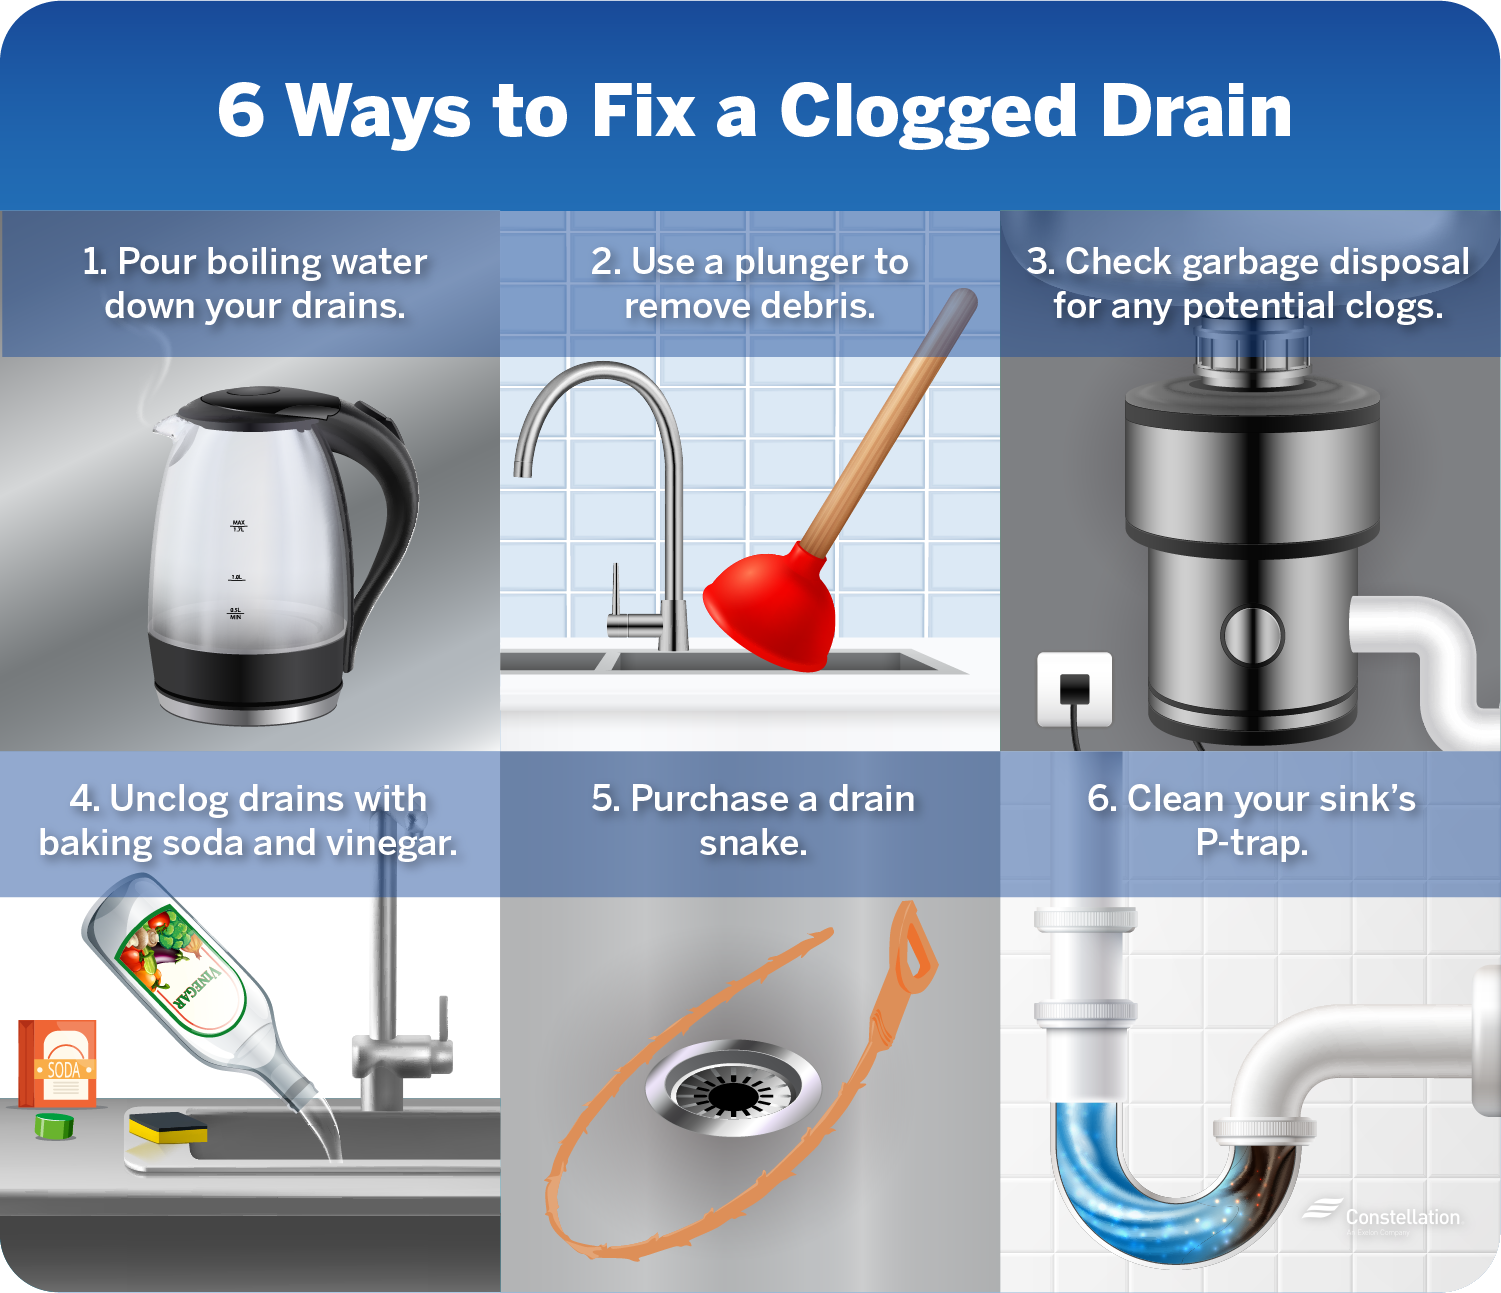 https://blog.constellation.com/wp-content/uploads/2021/03/how-to-unclog-a-sink-drain.png